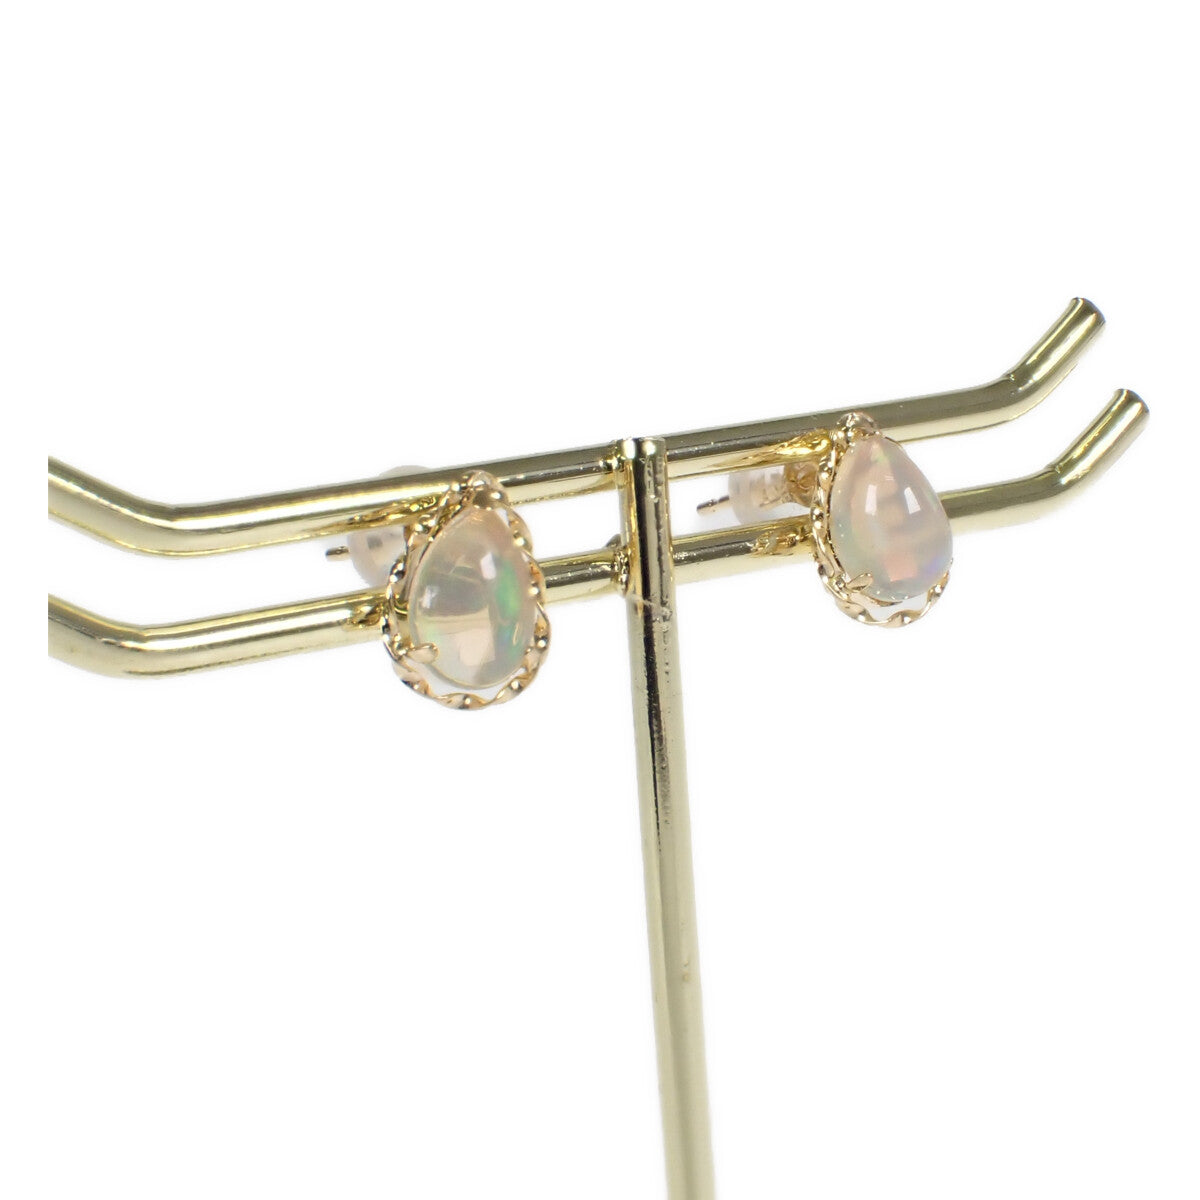 [LuxUness]  Women's 0.45ct Water Opal Design Earrings in K18 Yellow Gold, Gold, Never Used, Pre-owned in Brand new